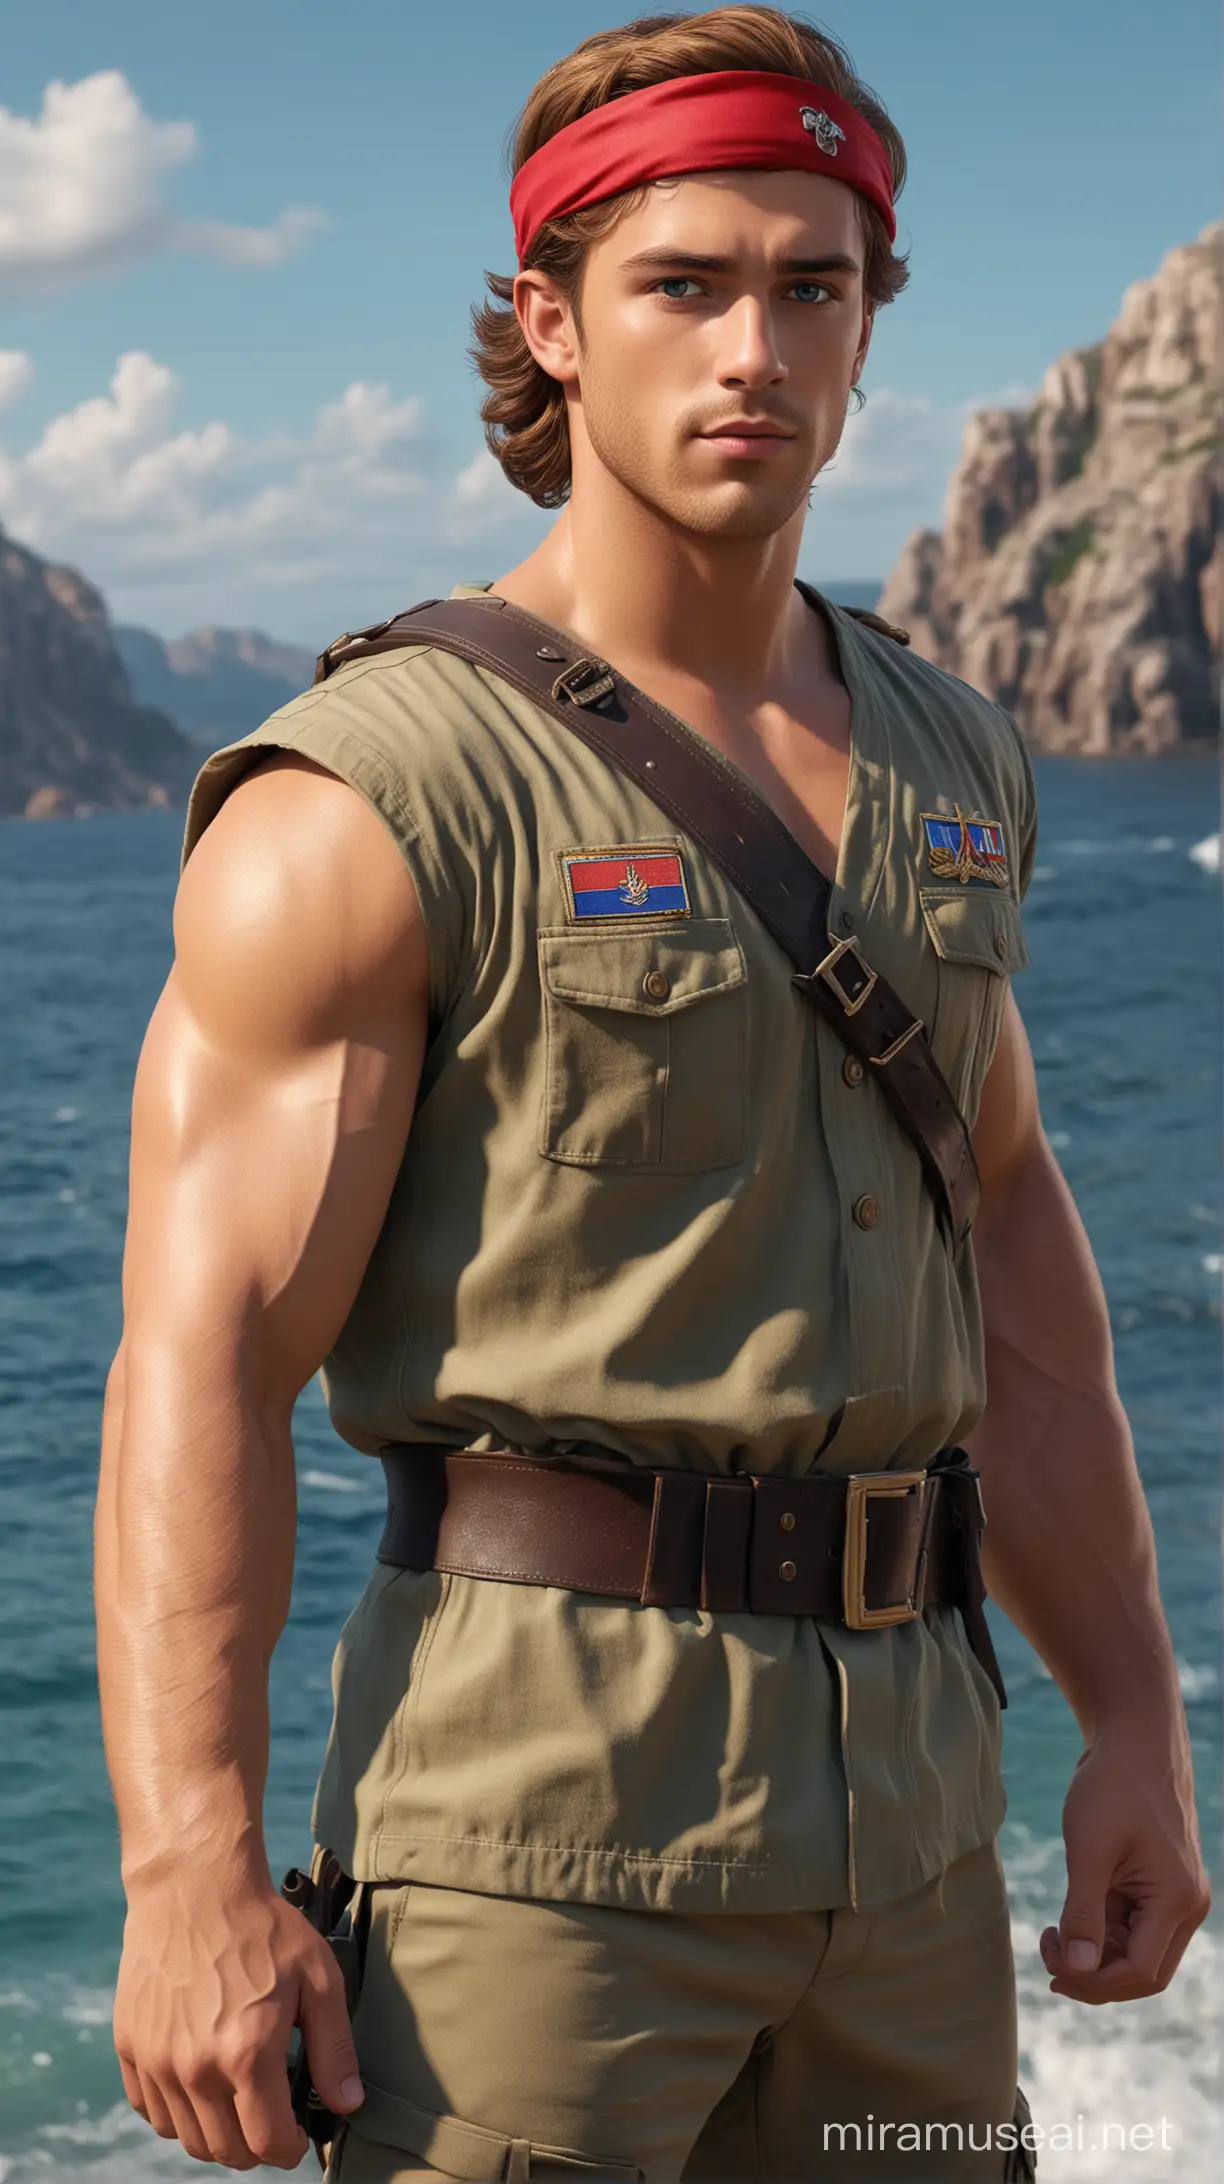 Disney Prince Hercules in Camouflage Military Uniform Amidst Natural Background